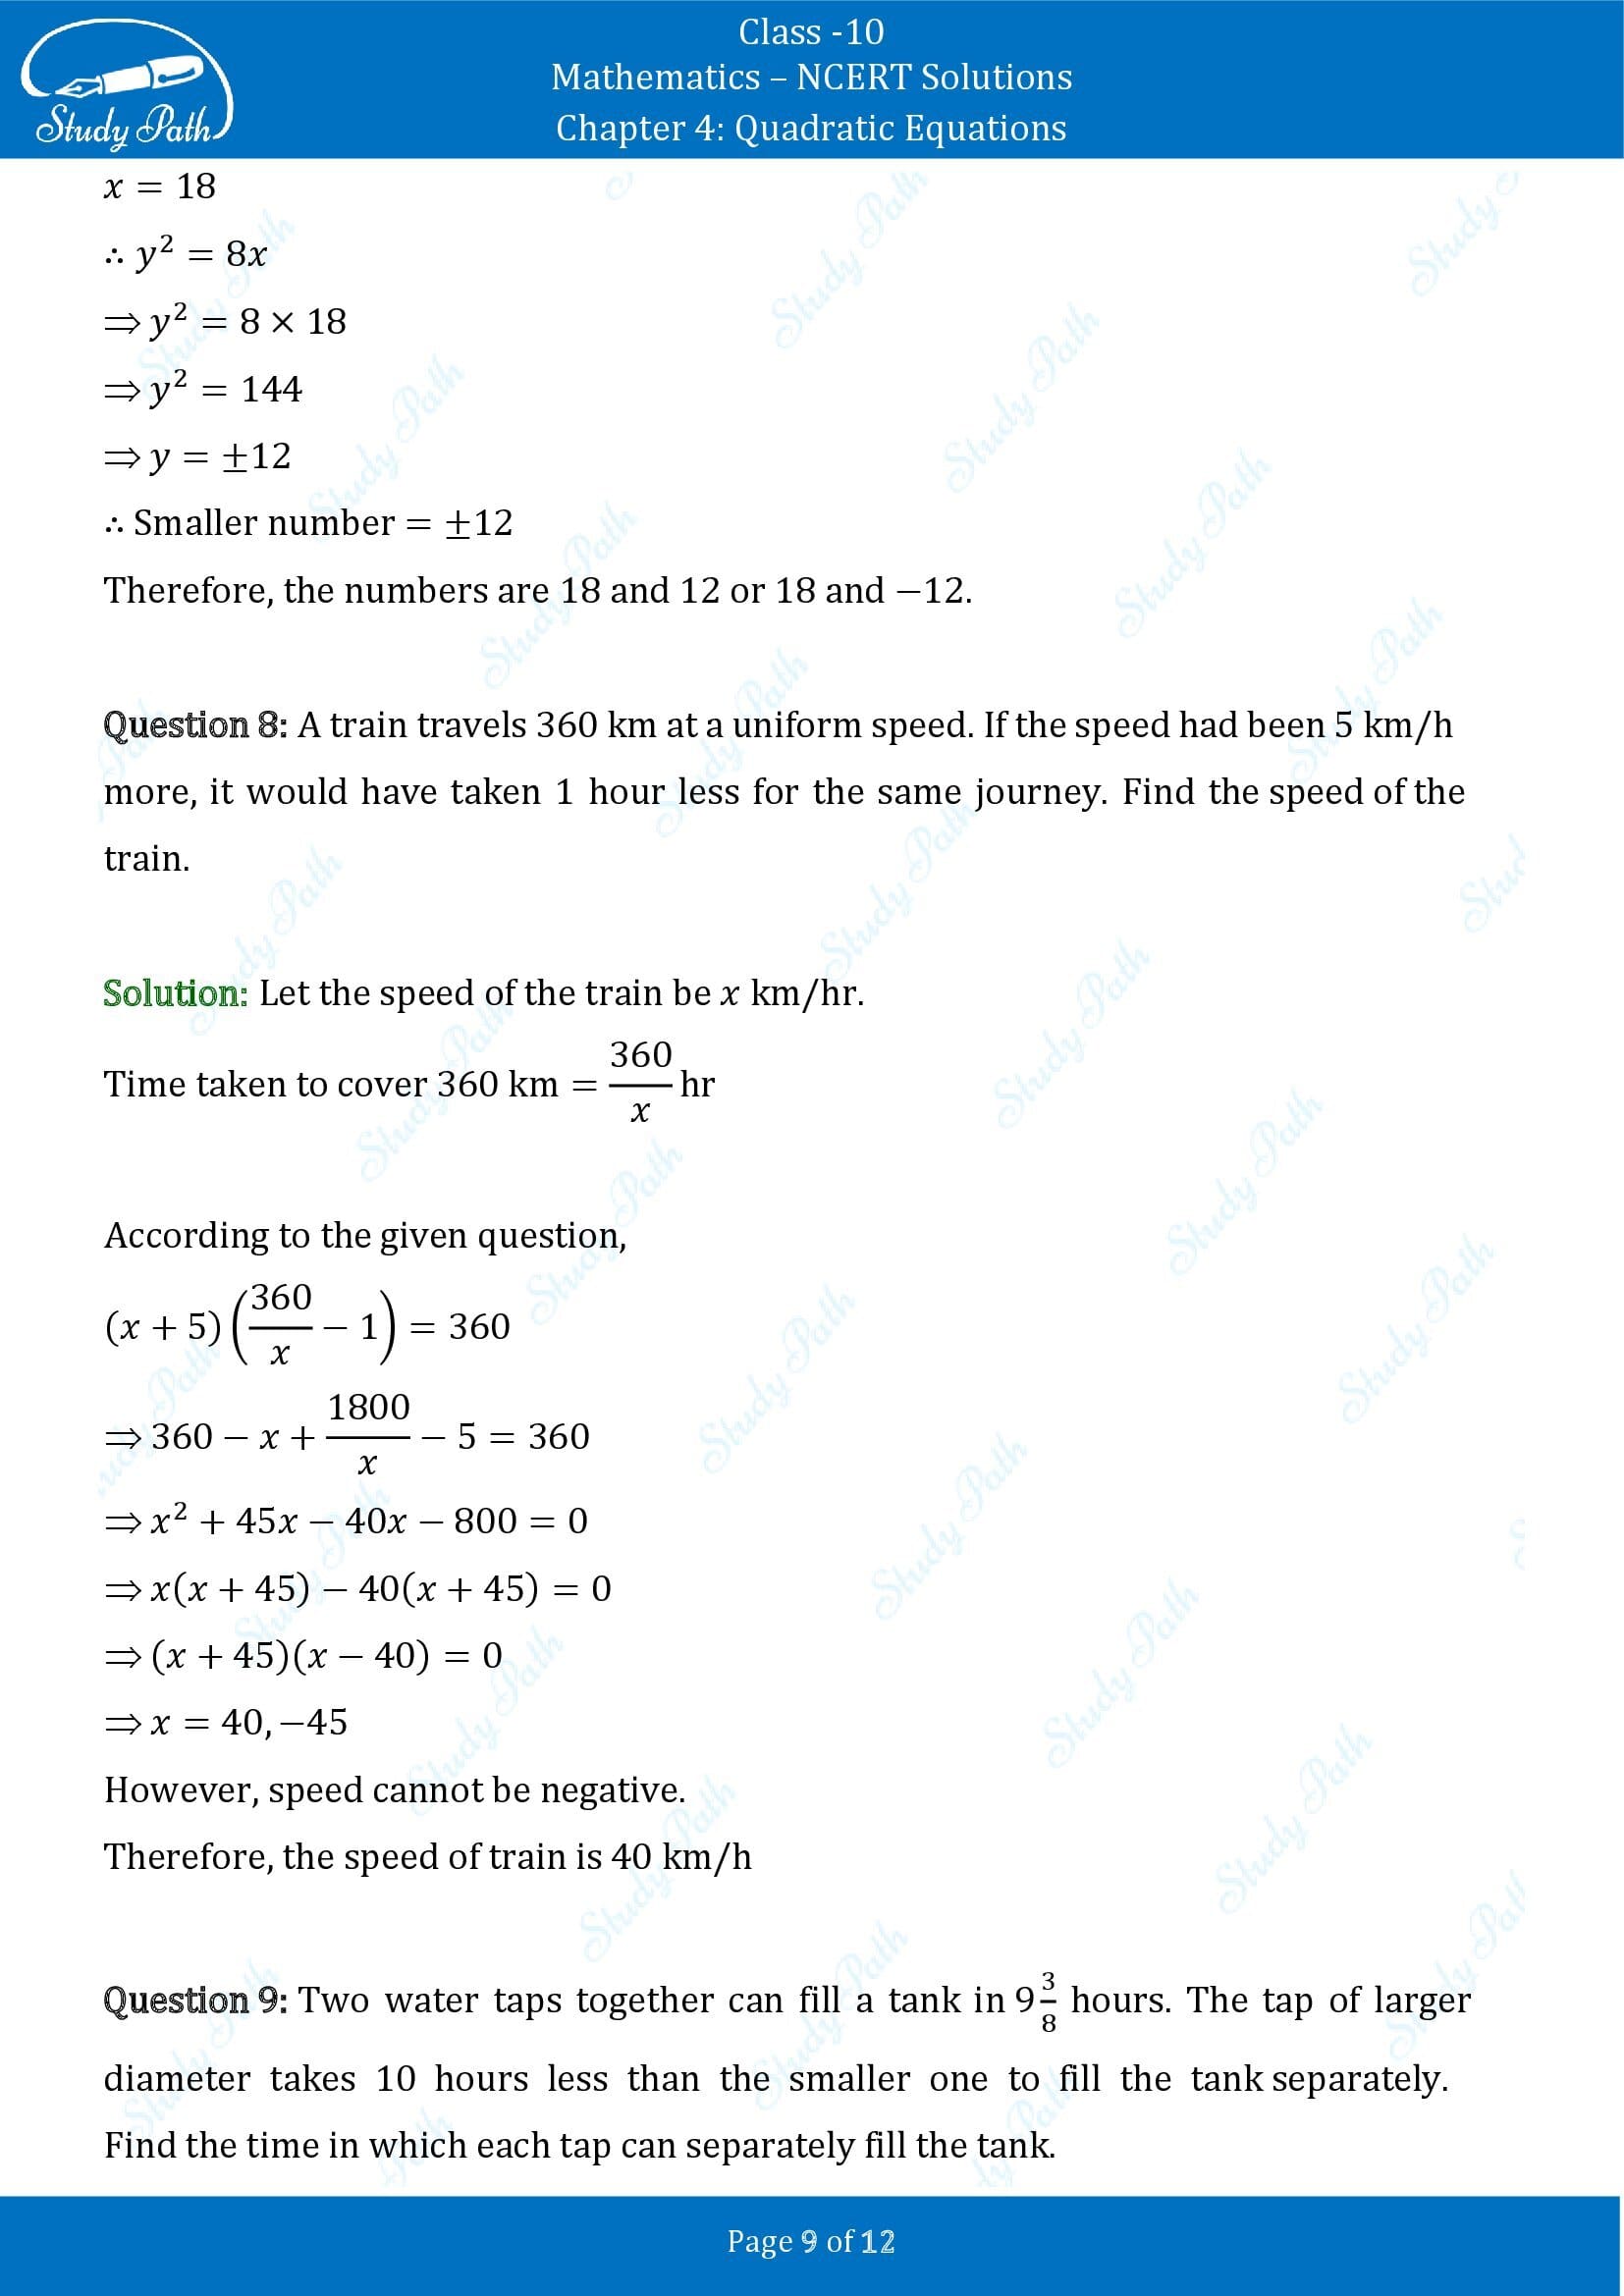 NCERT Solutions for Class 10 Maths Chapter 4 Quadratic Equations Exercise 4.3 0009